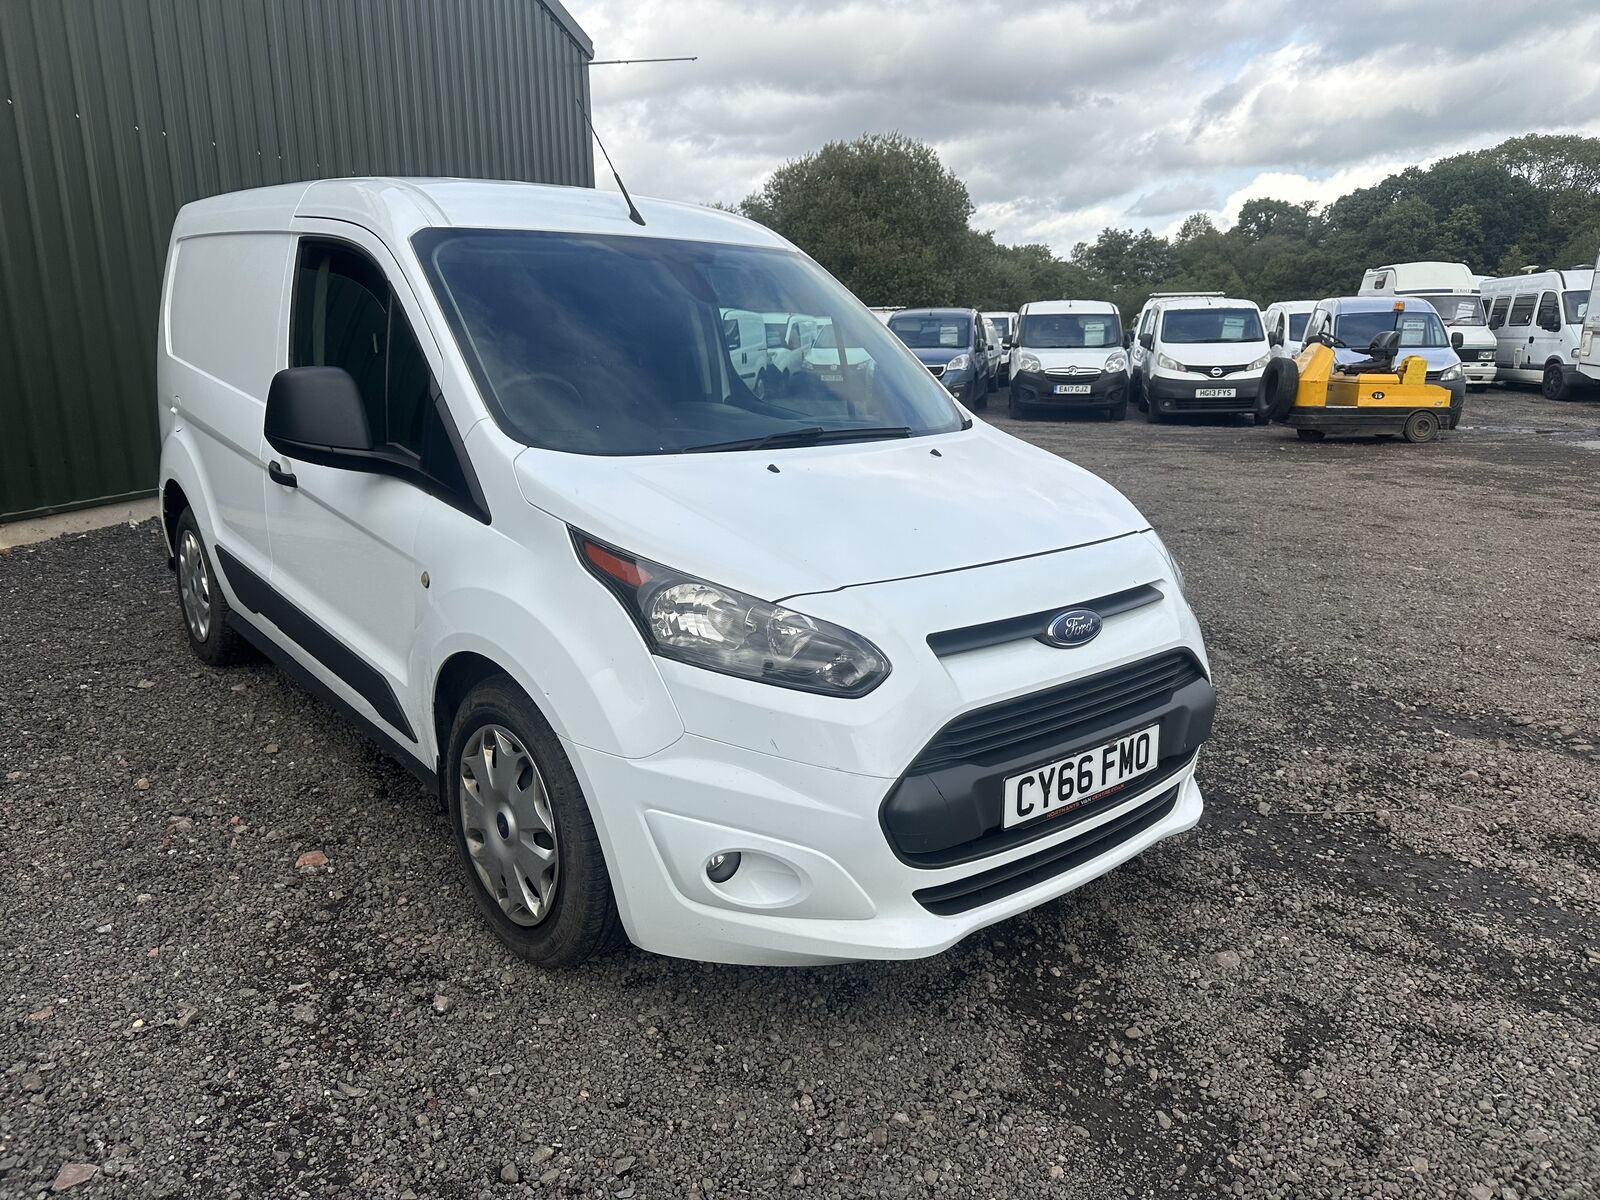 Bid on 2016 FORD TRANSIT CONNECT 200 L1: ECOBOOST TREND, (NO VAT ON HAMMER) - 121K MILES- Buy &amp; Sell on Auction with EAMA Group